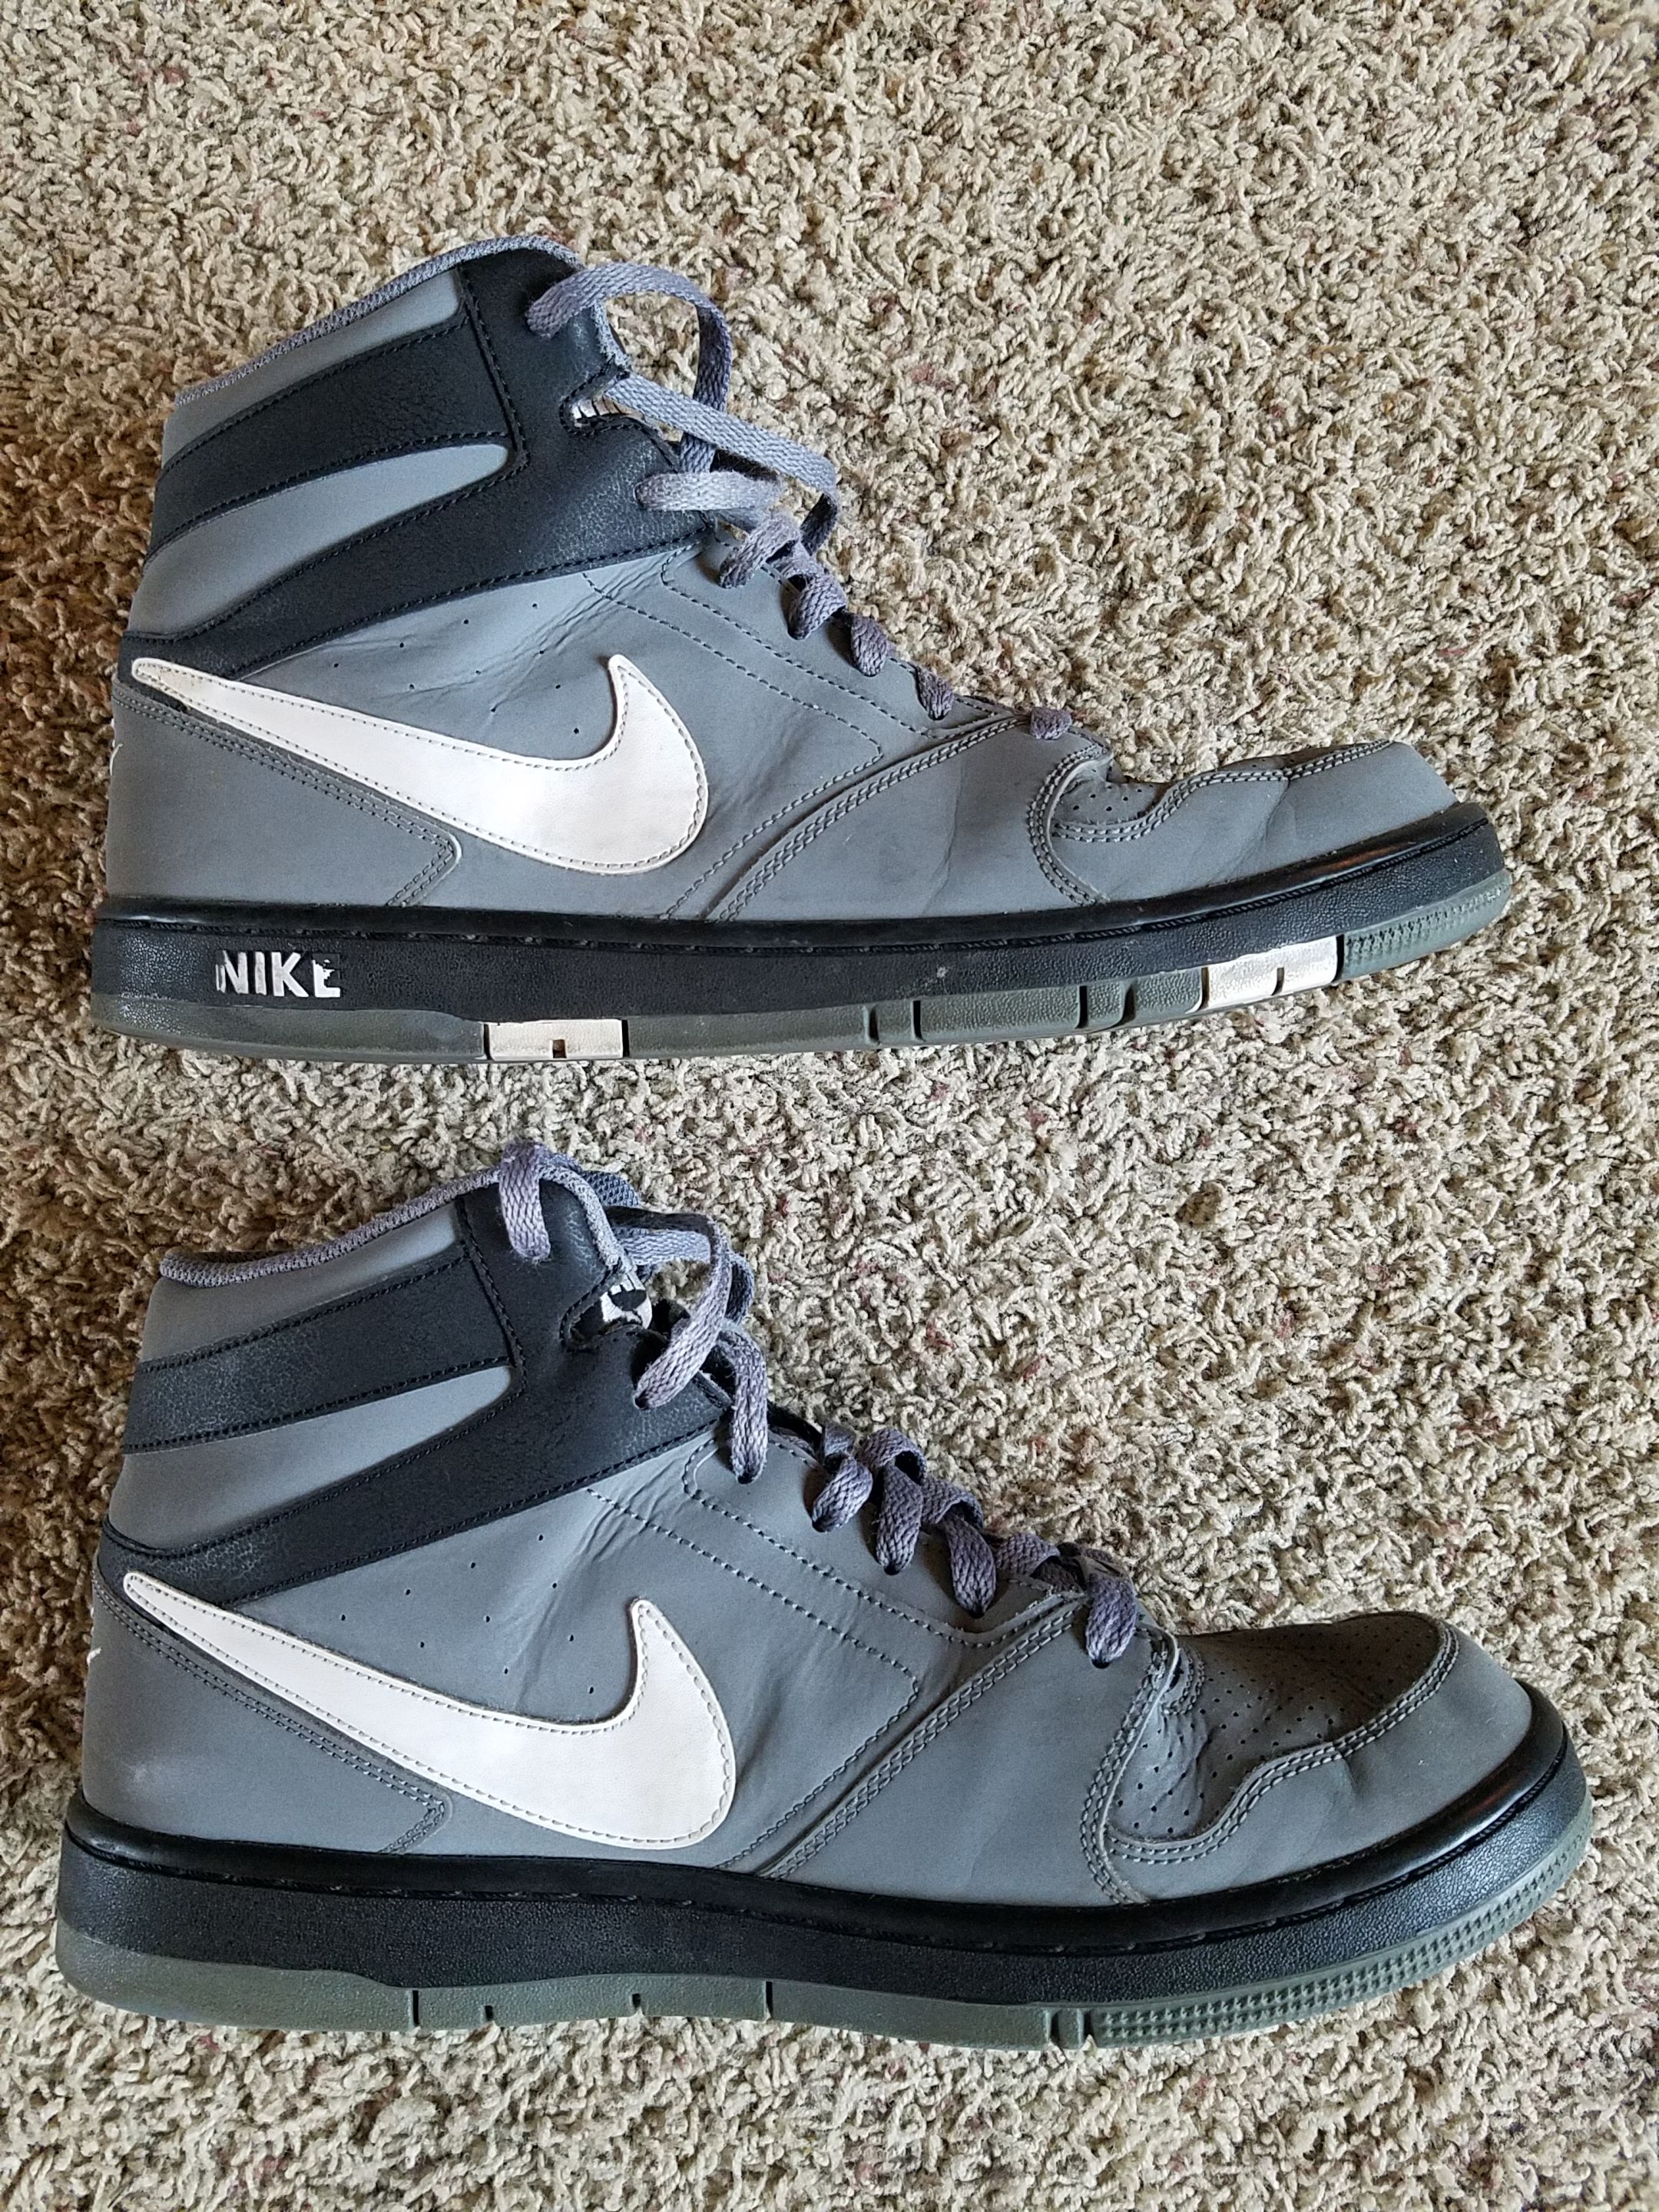 584614-012 IV High Gray Black Basketball Shoes Mens Size 11 for Sale Minneapolis, - OfferUp